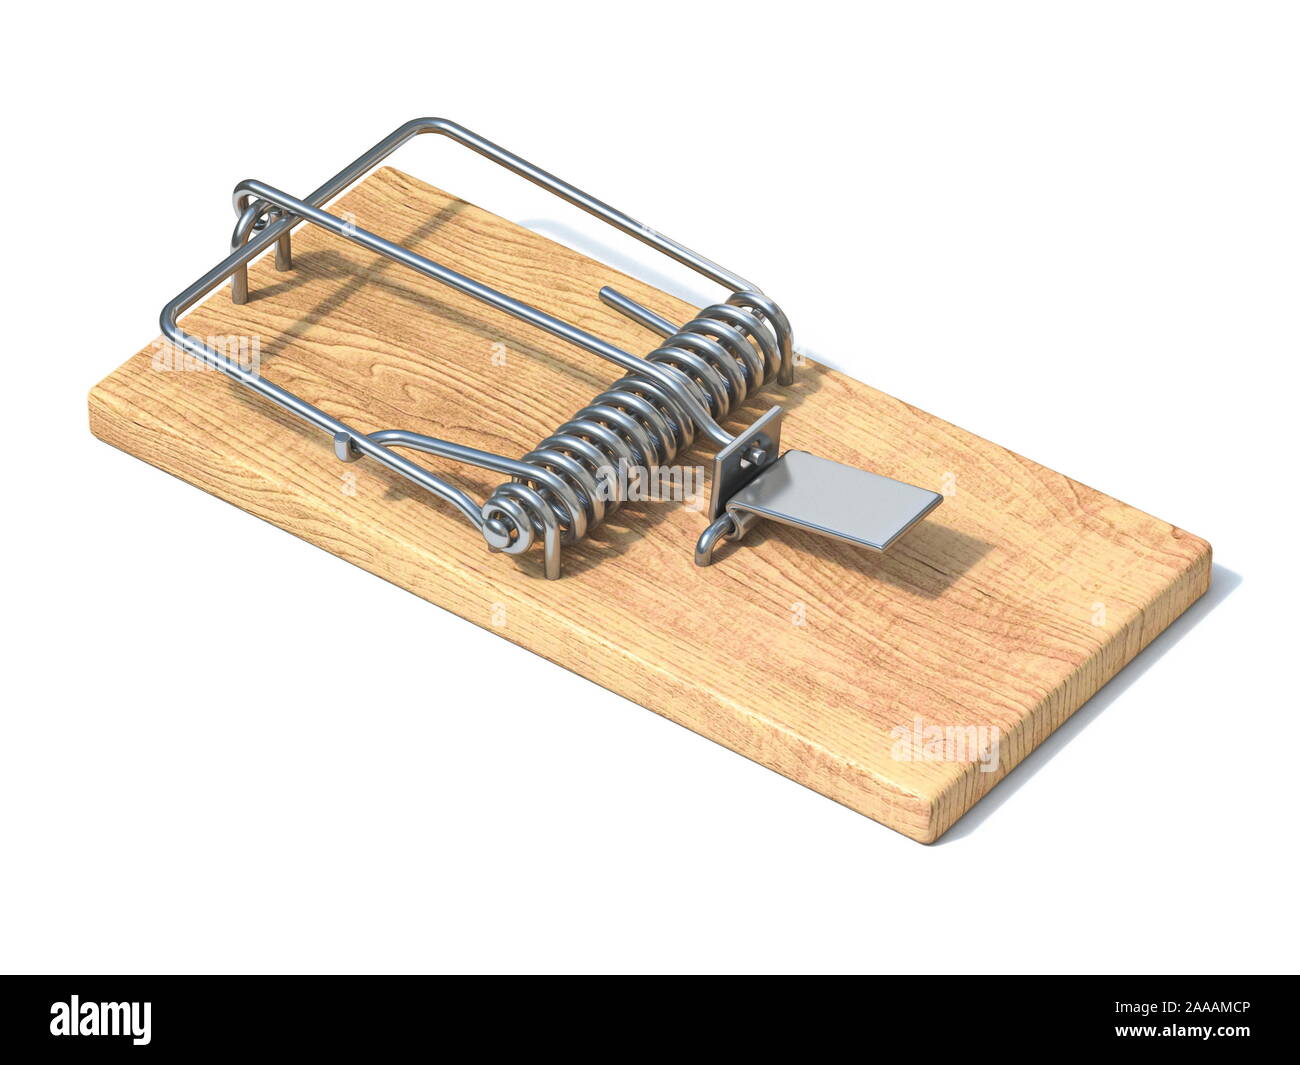 https://c8.alamy.com/comp/2AAAMCP/wooden-mousetrap-3d-rendering-illustration-isolated-on-white-background-2AAAMCP.jpg